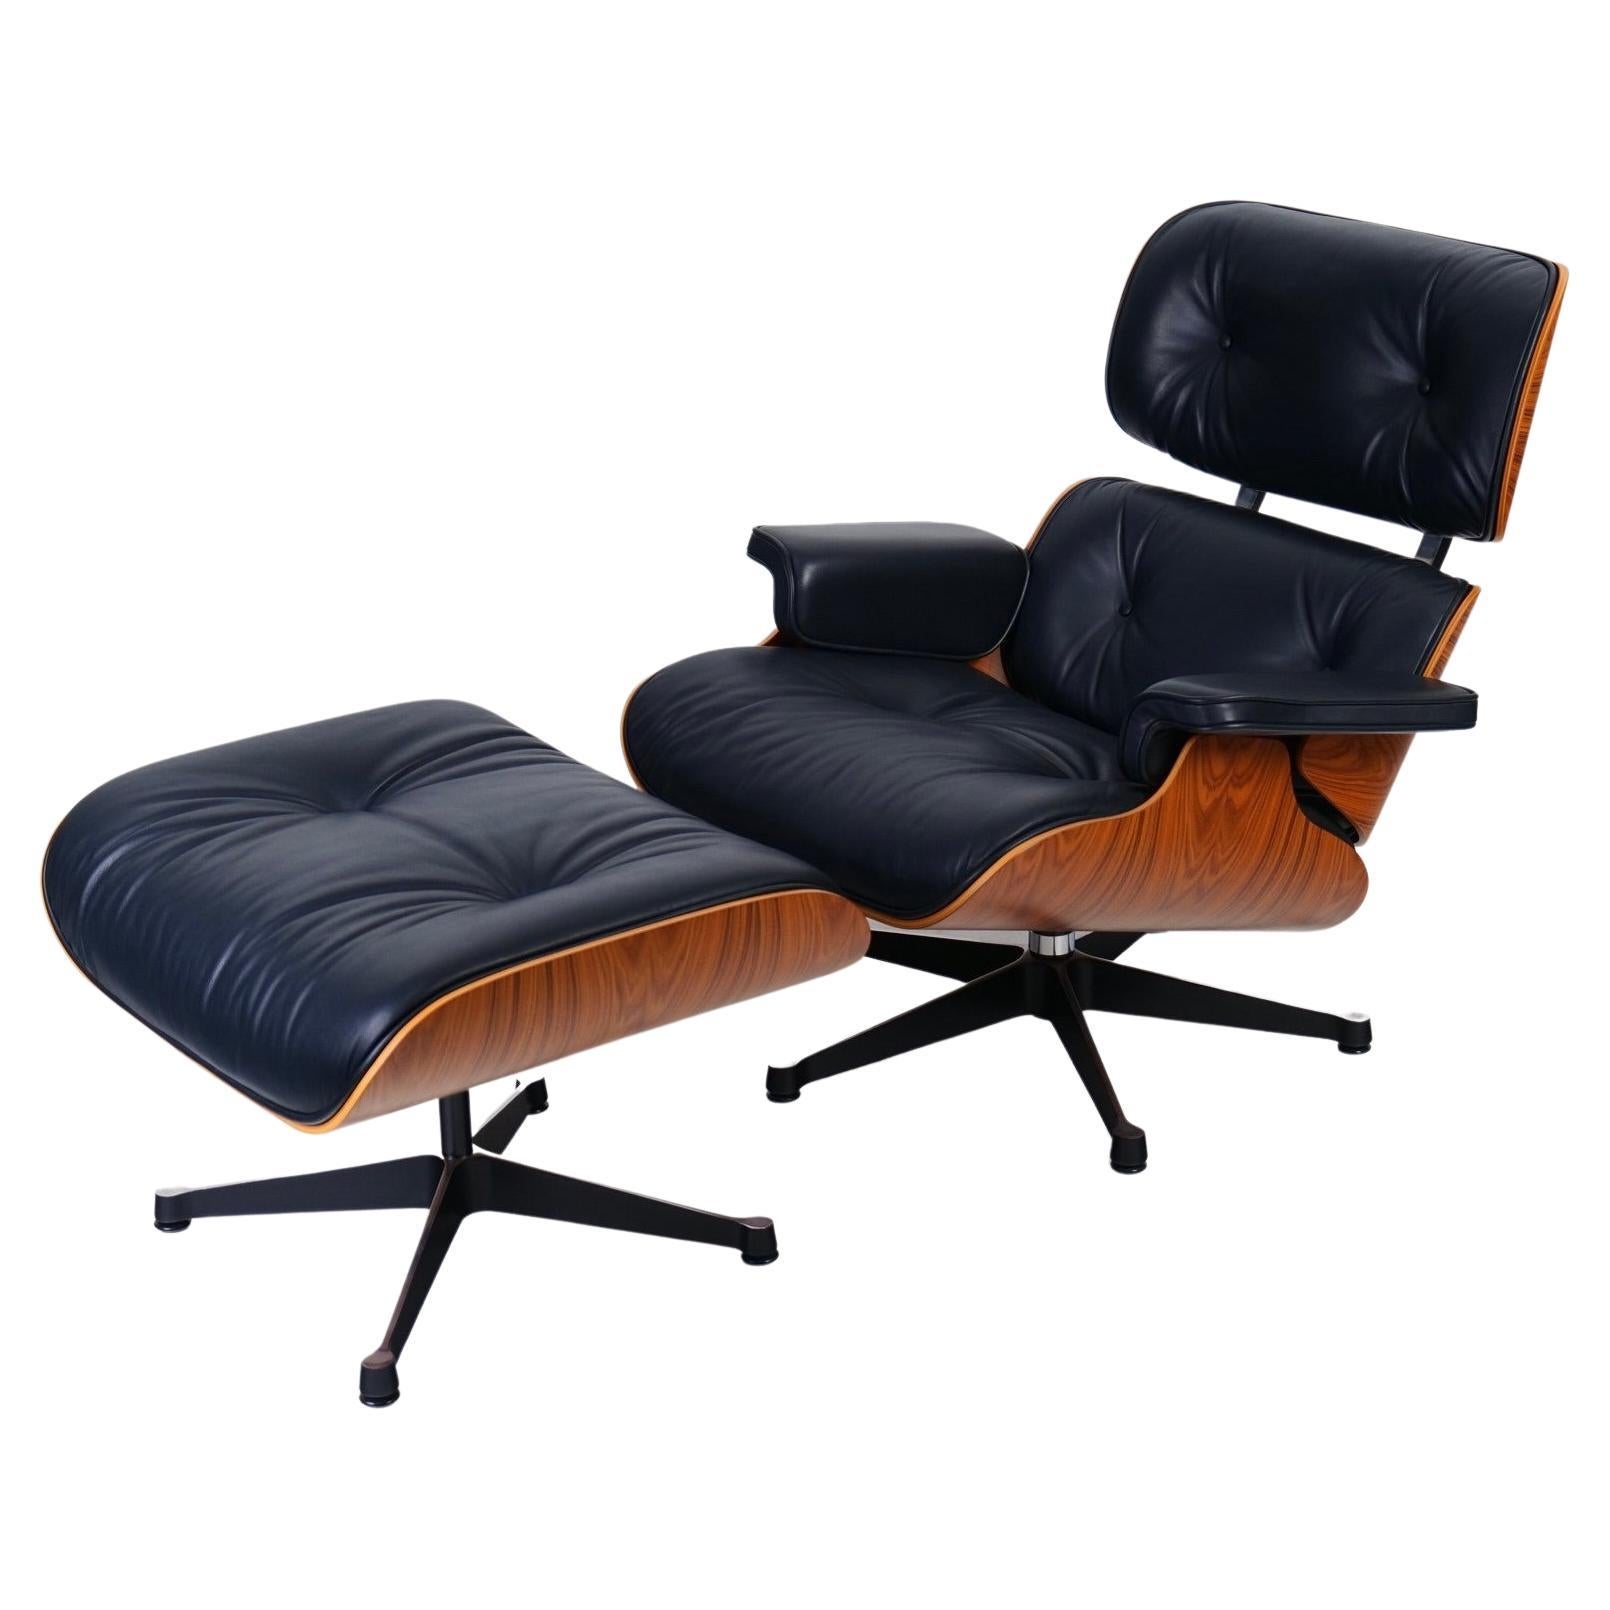 50s Anniversary Edition No. 000/999 Eames Lounge Chair, Vitra by Herman Miller For Sale